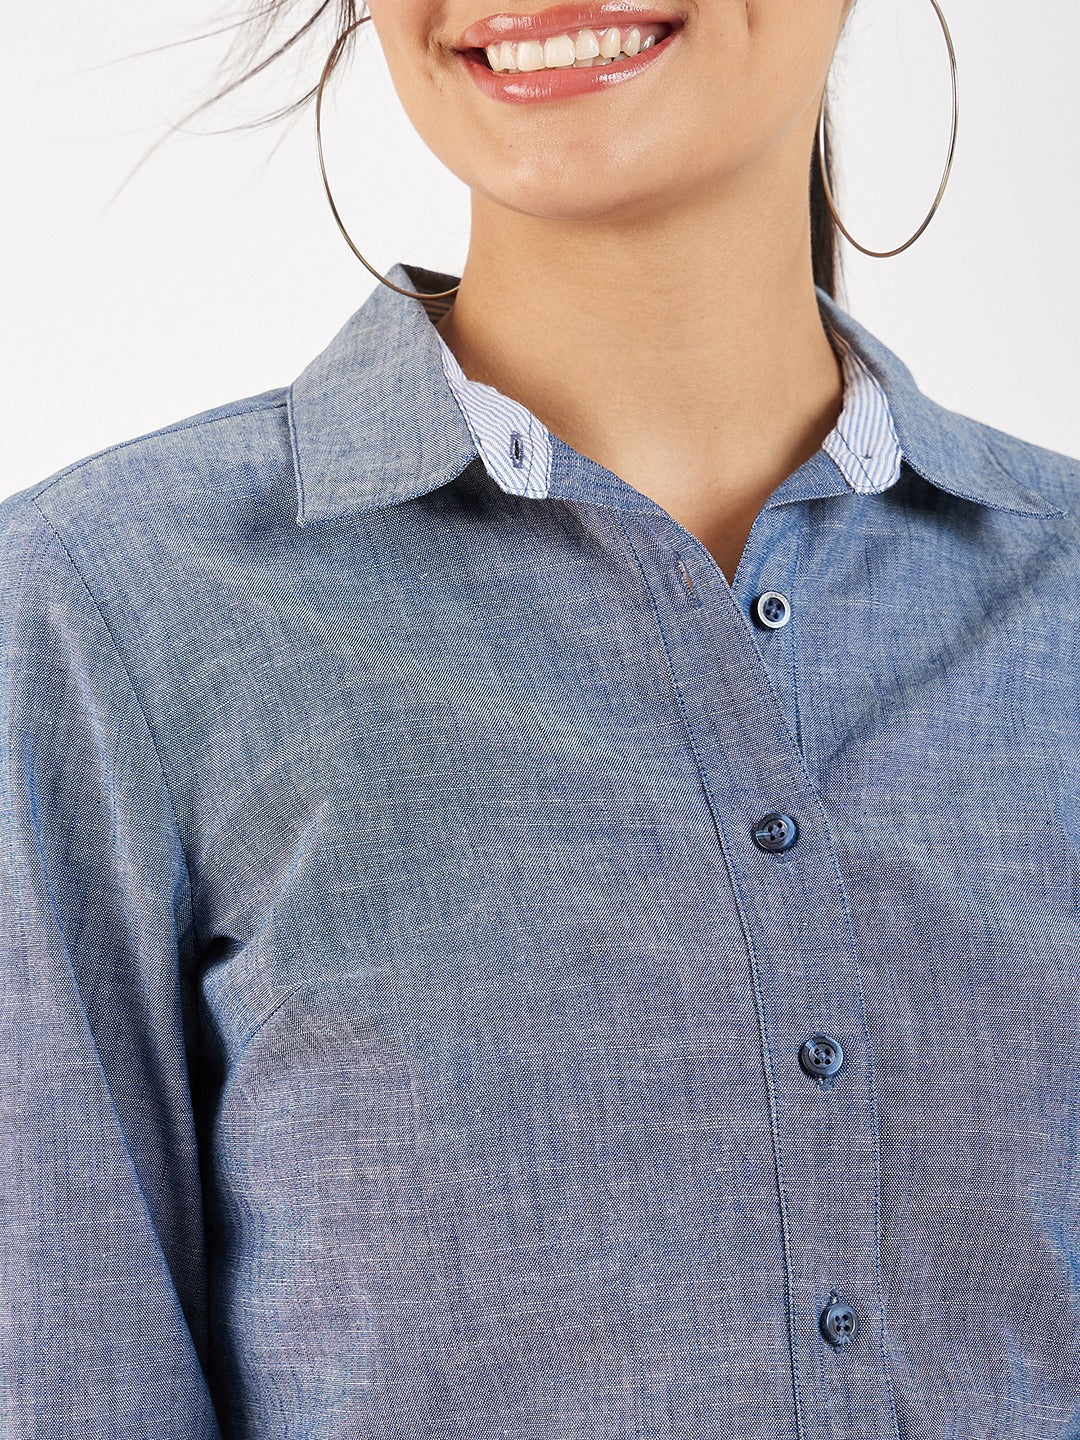 BUTTON DOWN SHIRT WITH CONTRAST TRIM